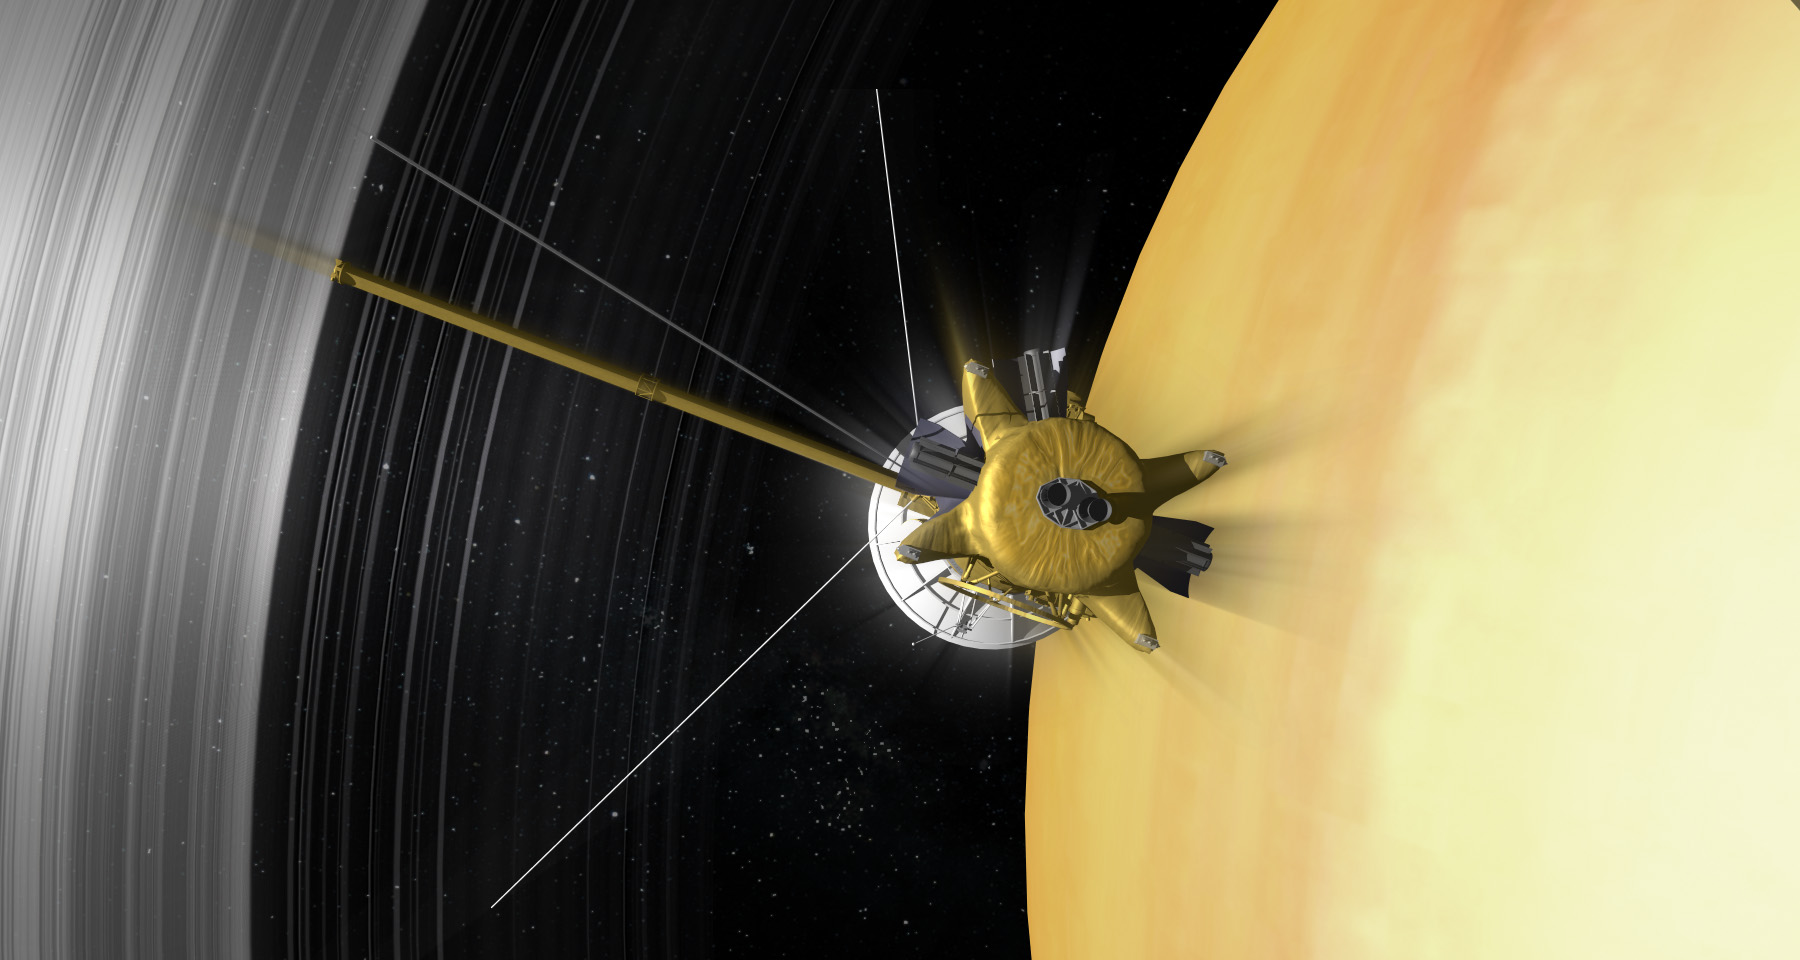 A spacecraft flies above a yellow curved surface.